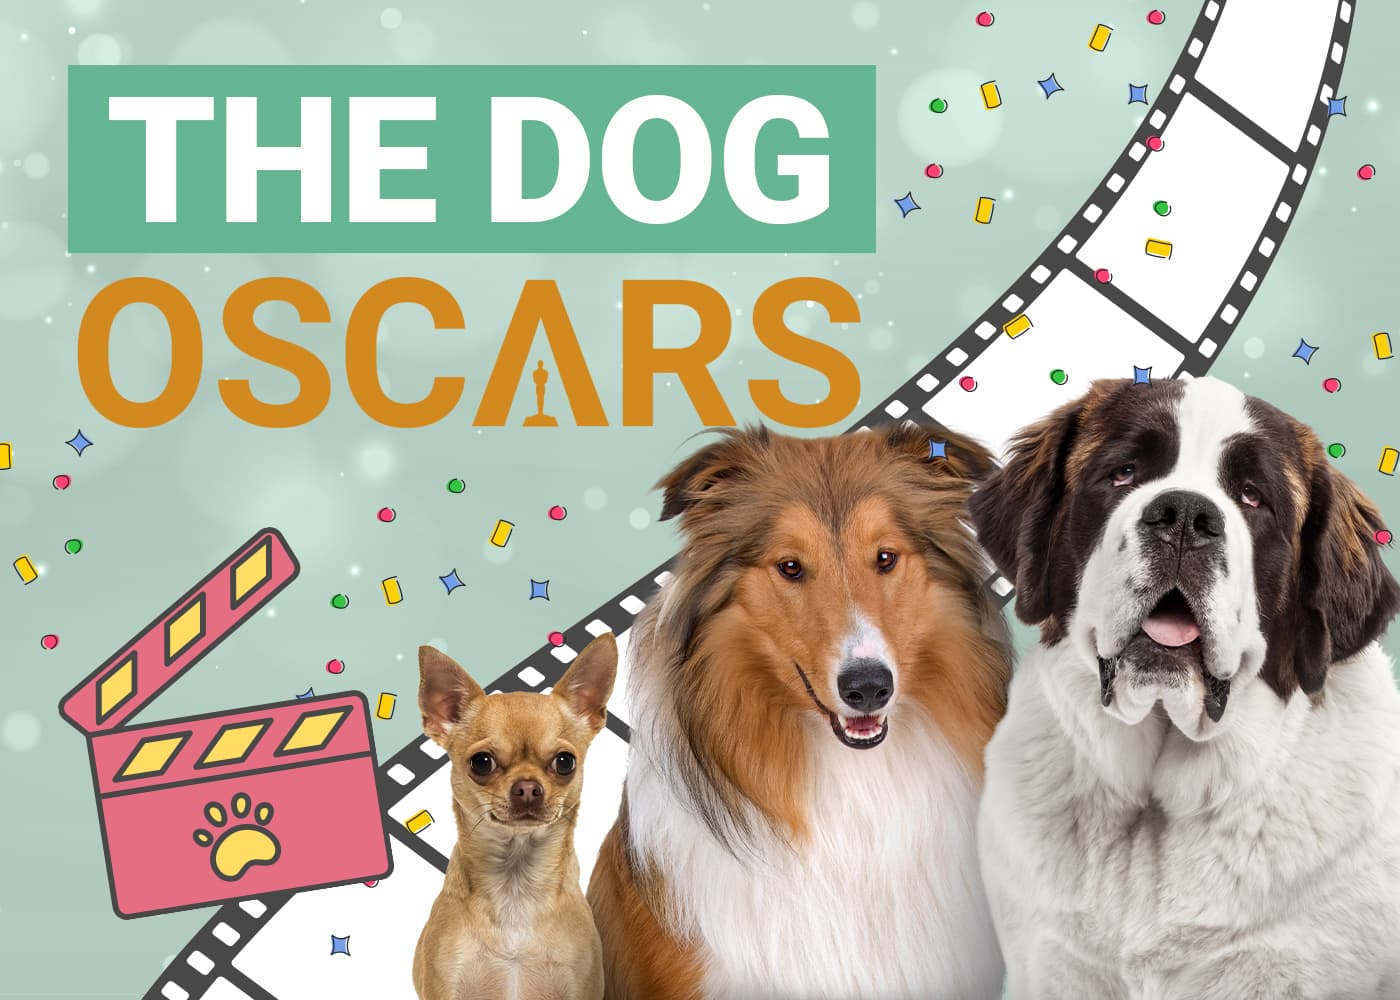 The Dog Oscars: Presenting Hollywood’s Top Dog Movies, Actors & Franchises